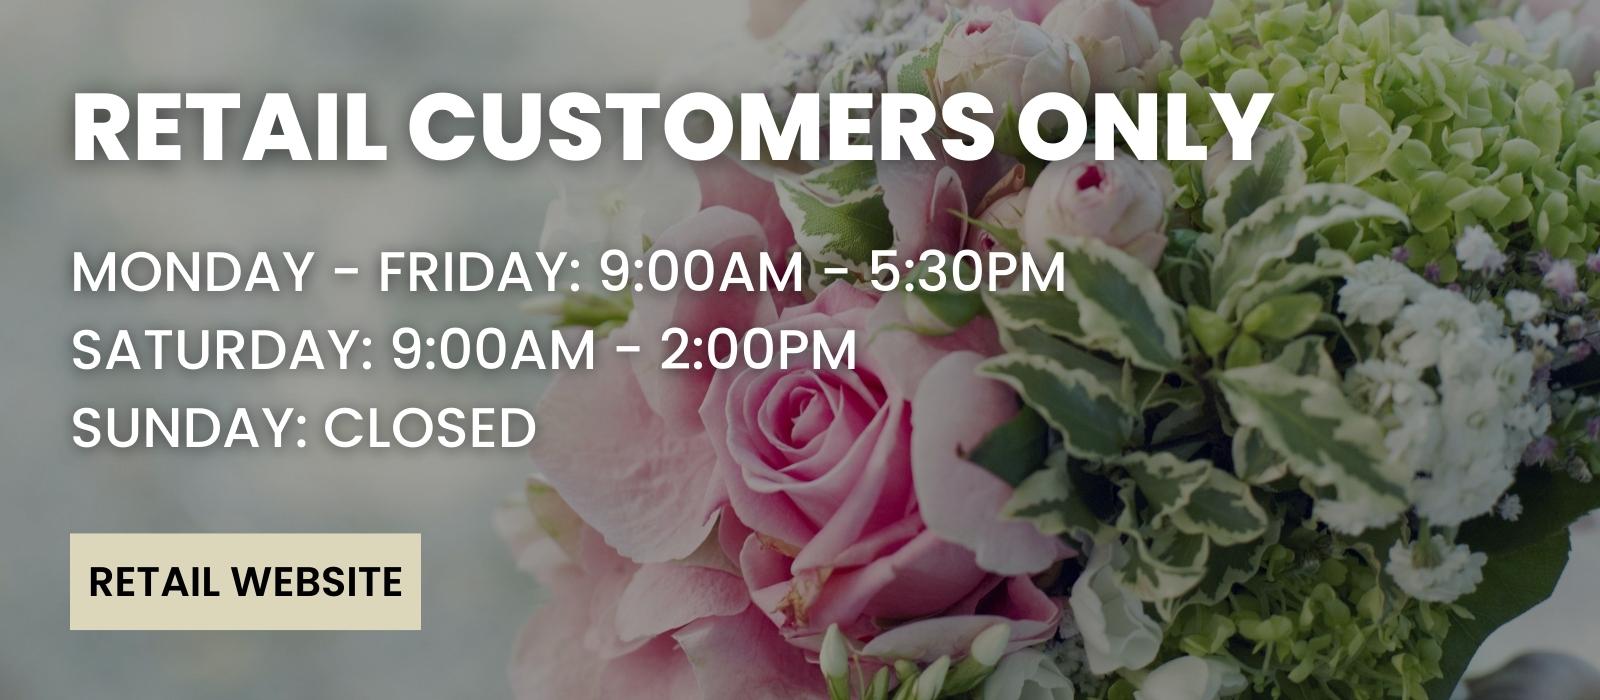 normal business hours - retail customers